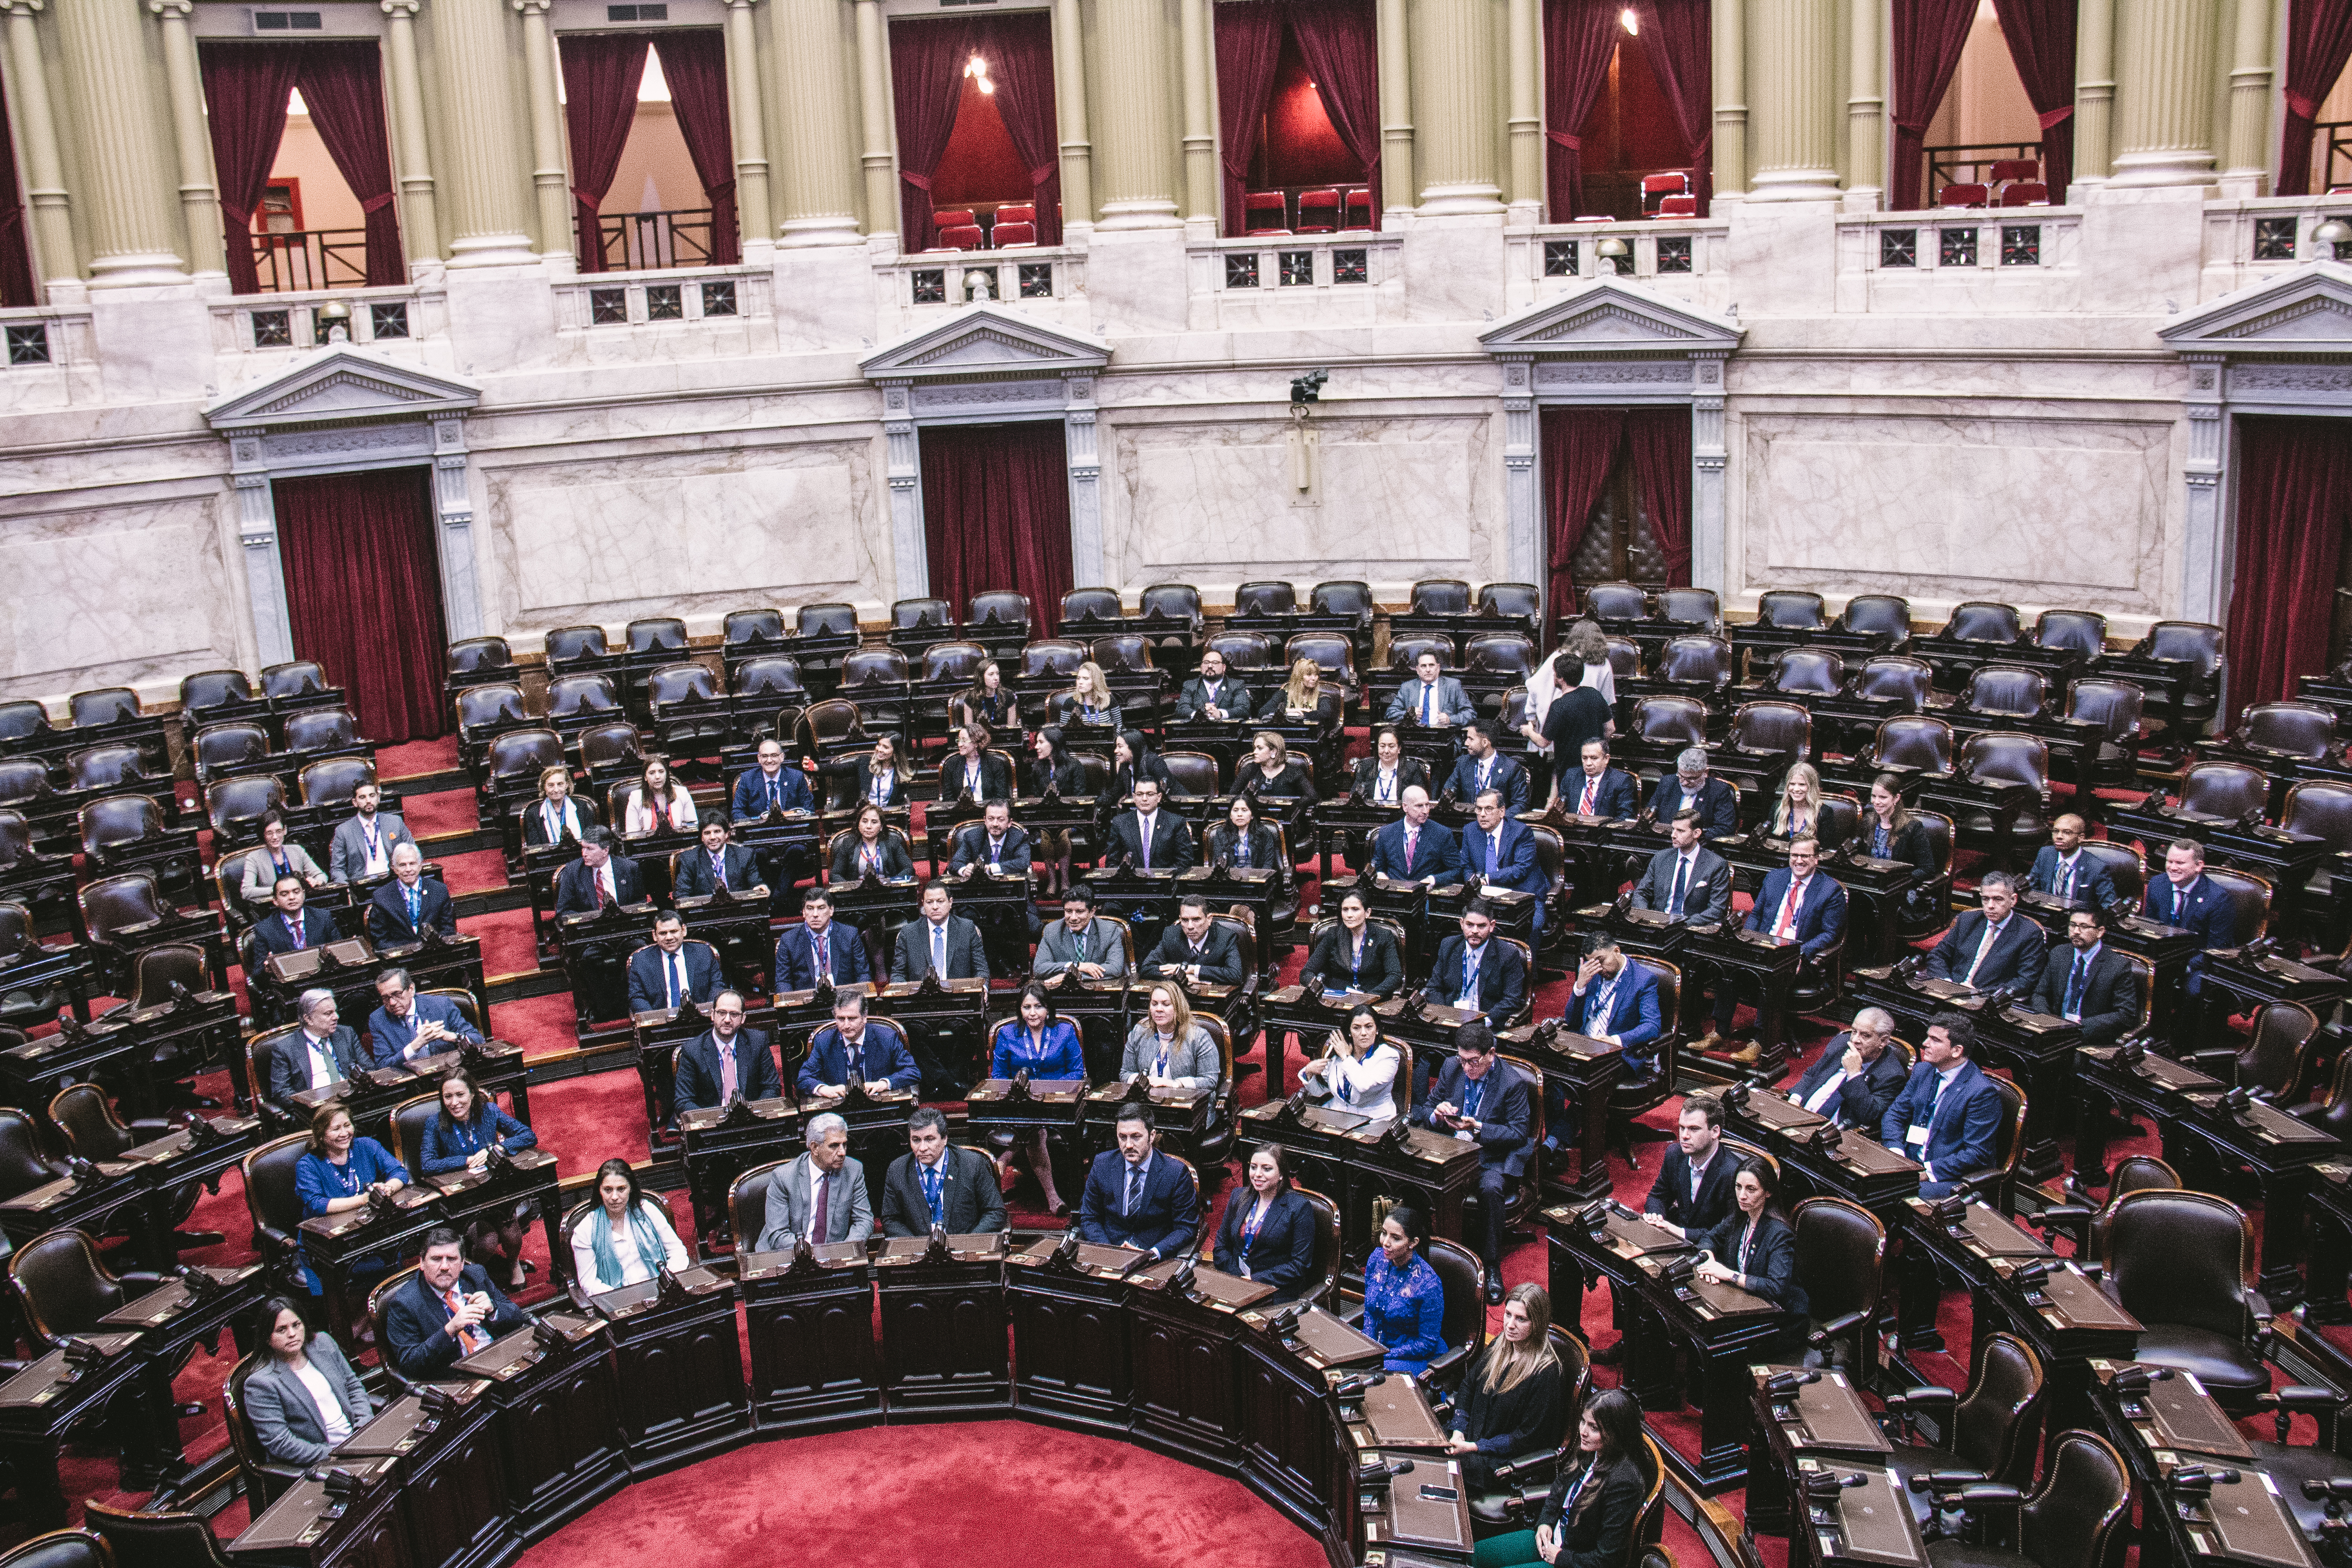 Delegates debate the declaration on the floor of the Argentine Chamber of Deputies.